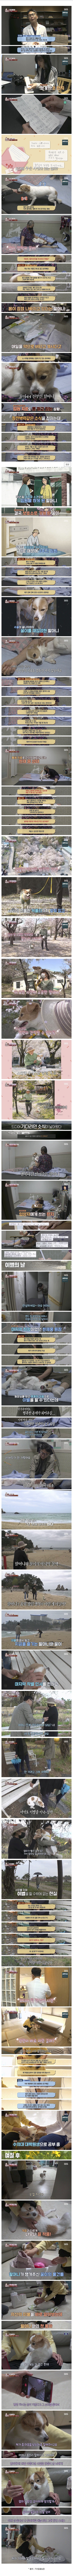 The reason why veterinarian Jaewoong Han reported 10 years after appearing on Animal Farm